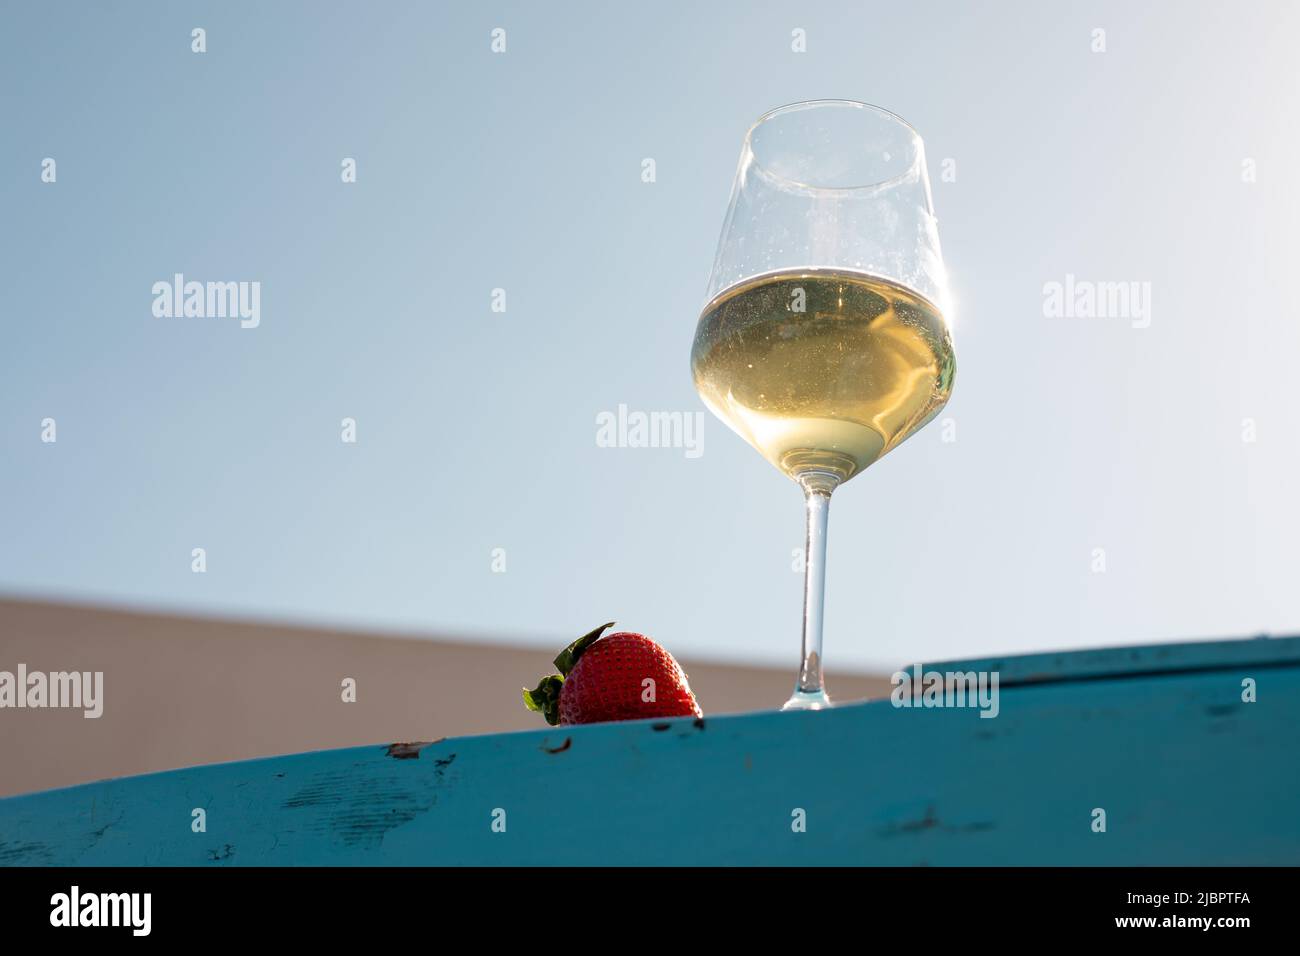 Close-up photo of wineglass with white yellow wine with strawberry. Vacation, romantic travelling and adventure concept. Stock Photo